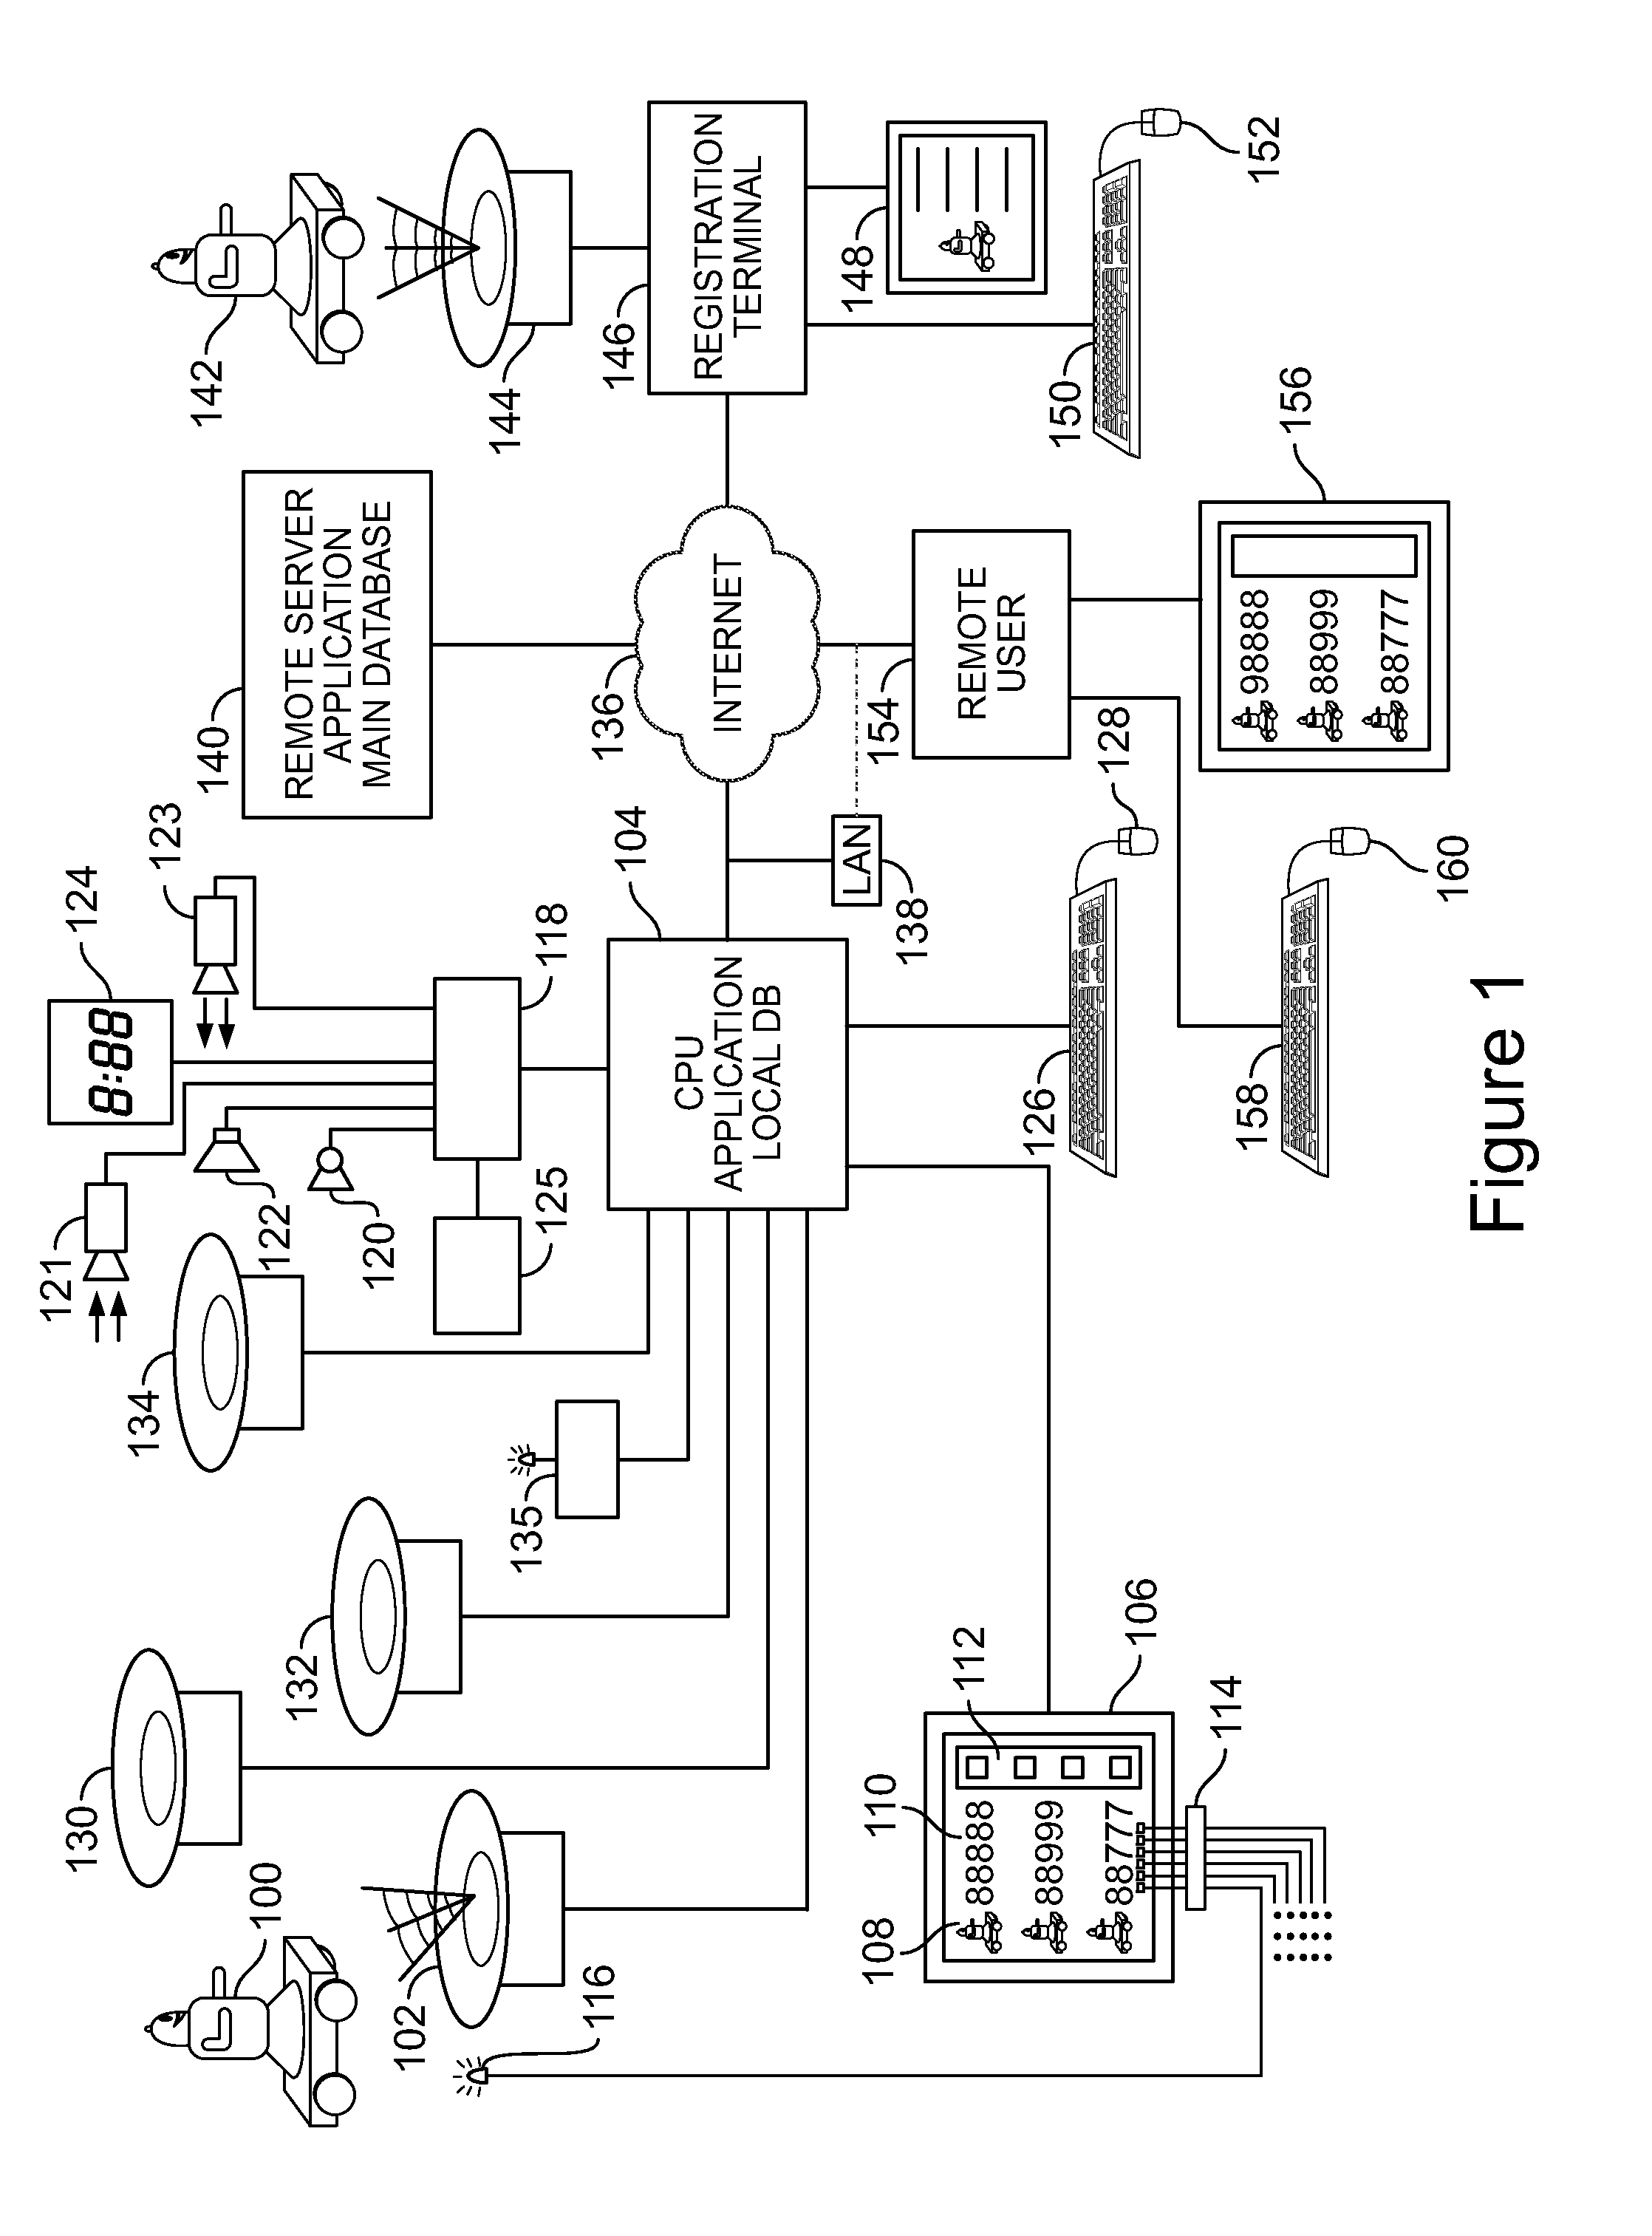 System and apparatus for a controlled toy to interact with a computer game